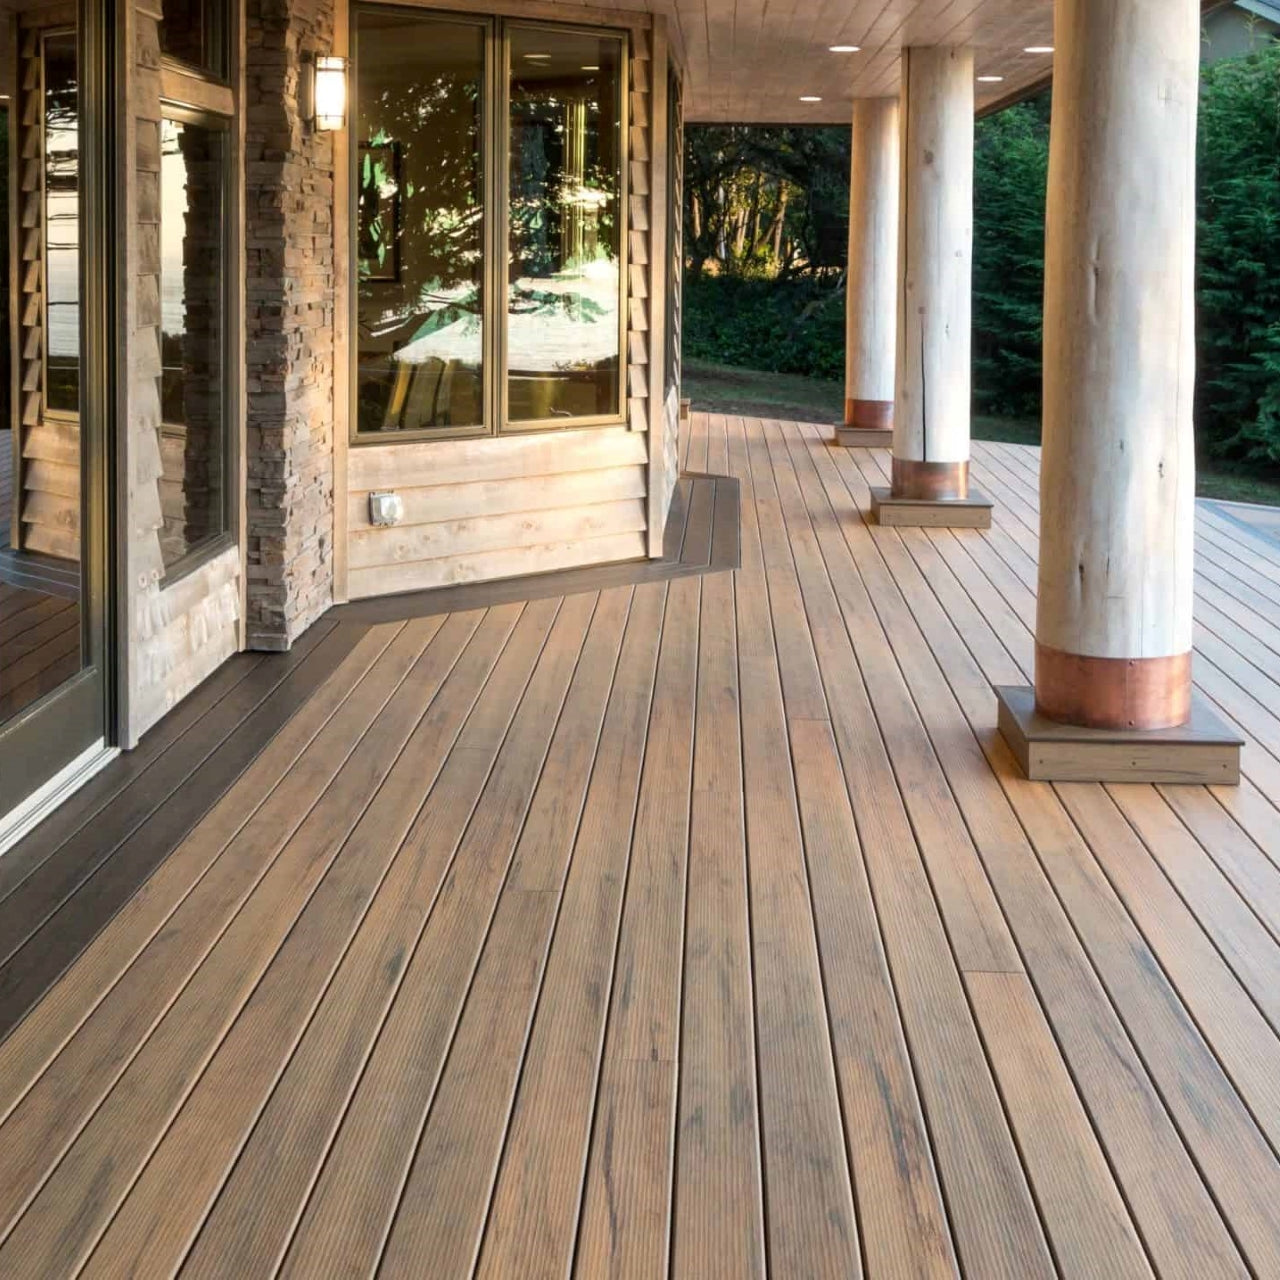 TimberTech Legacy Decking Tigerwood varigated capped composite decking collections